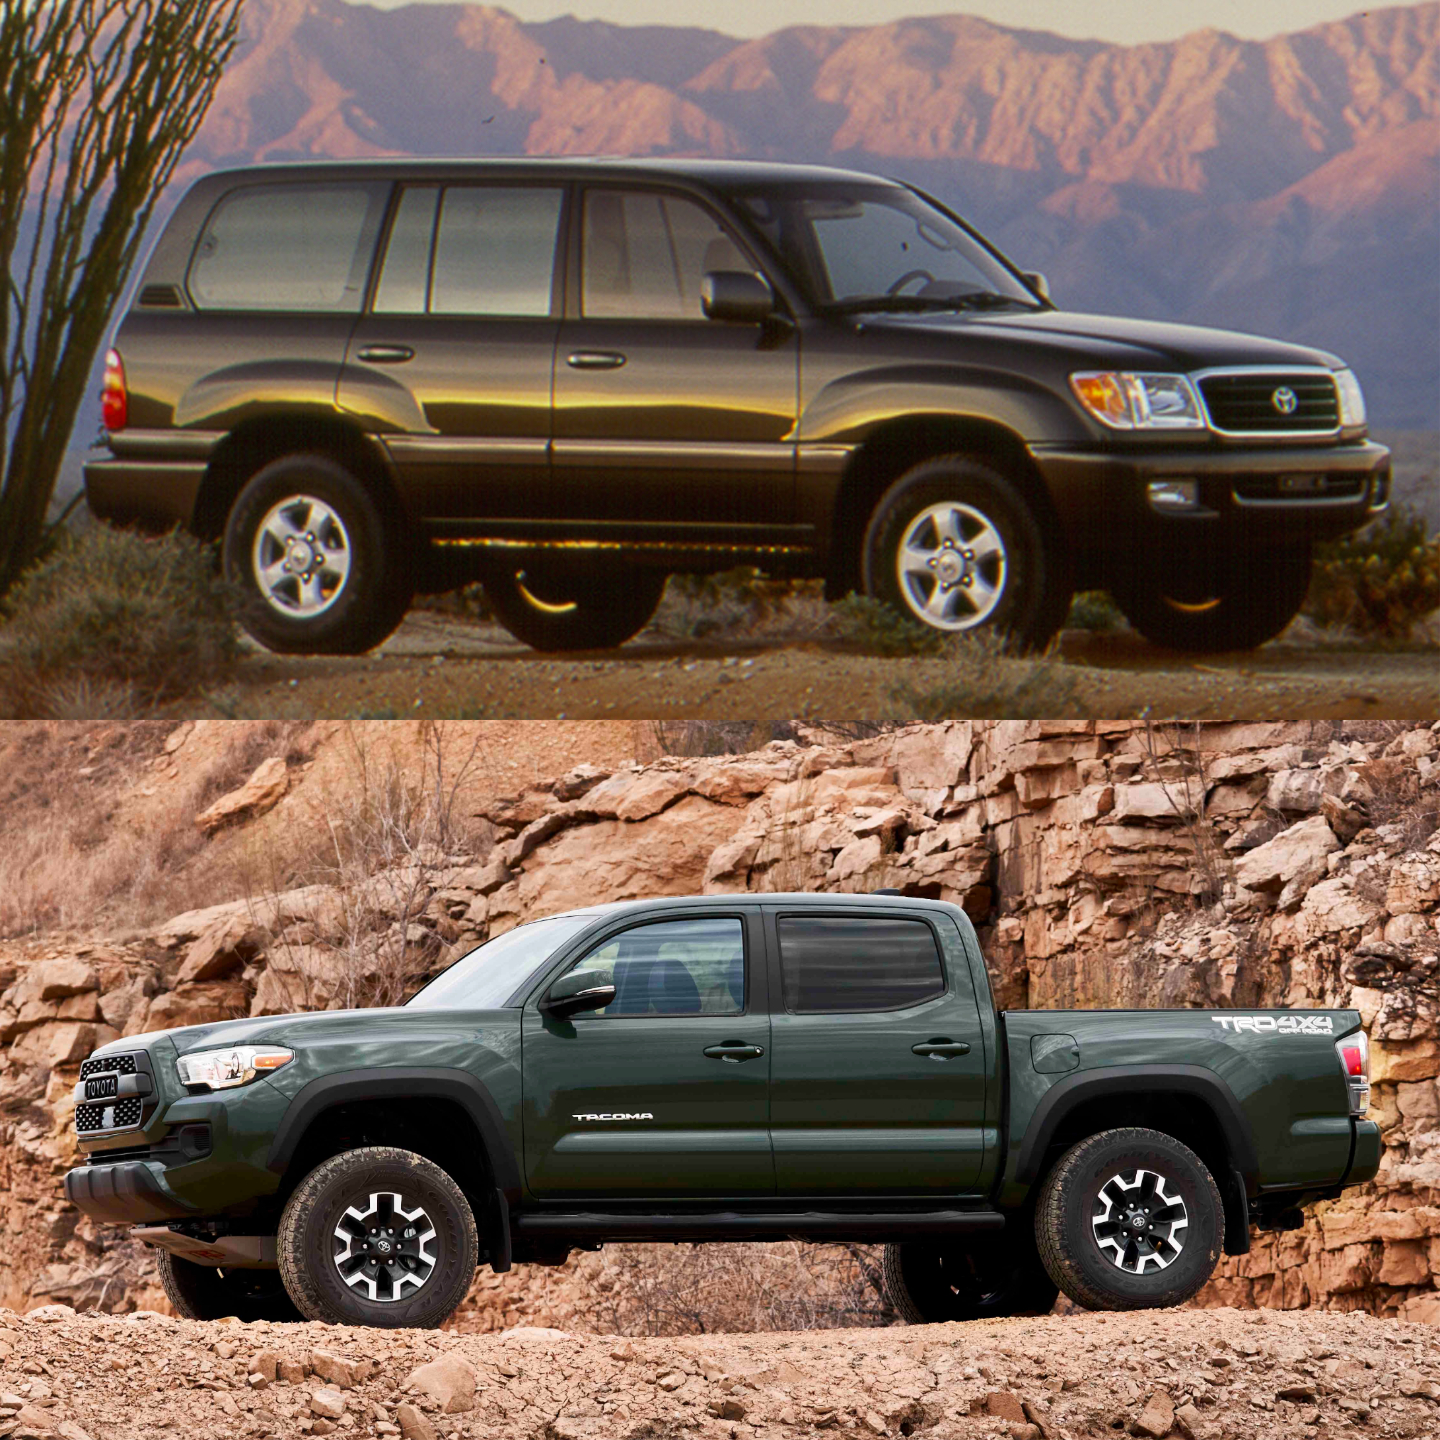 The Toyota Tacoma truck and the Land Cruiser SUV